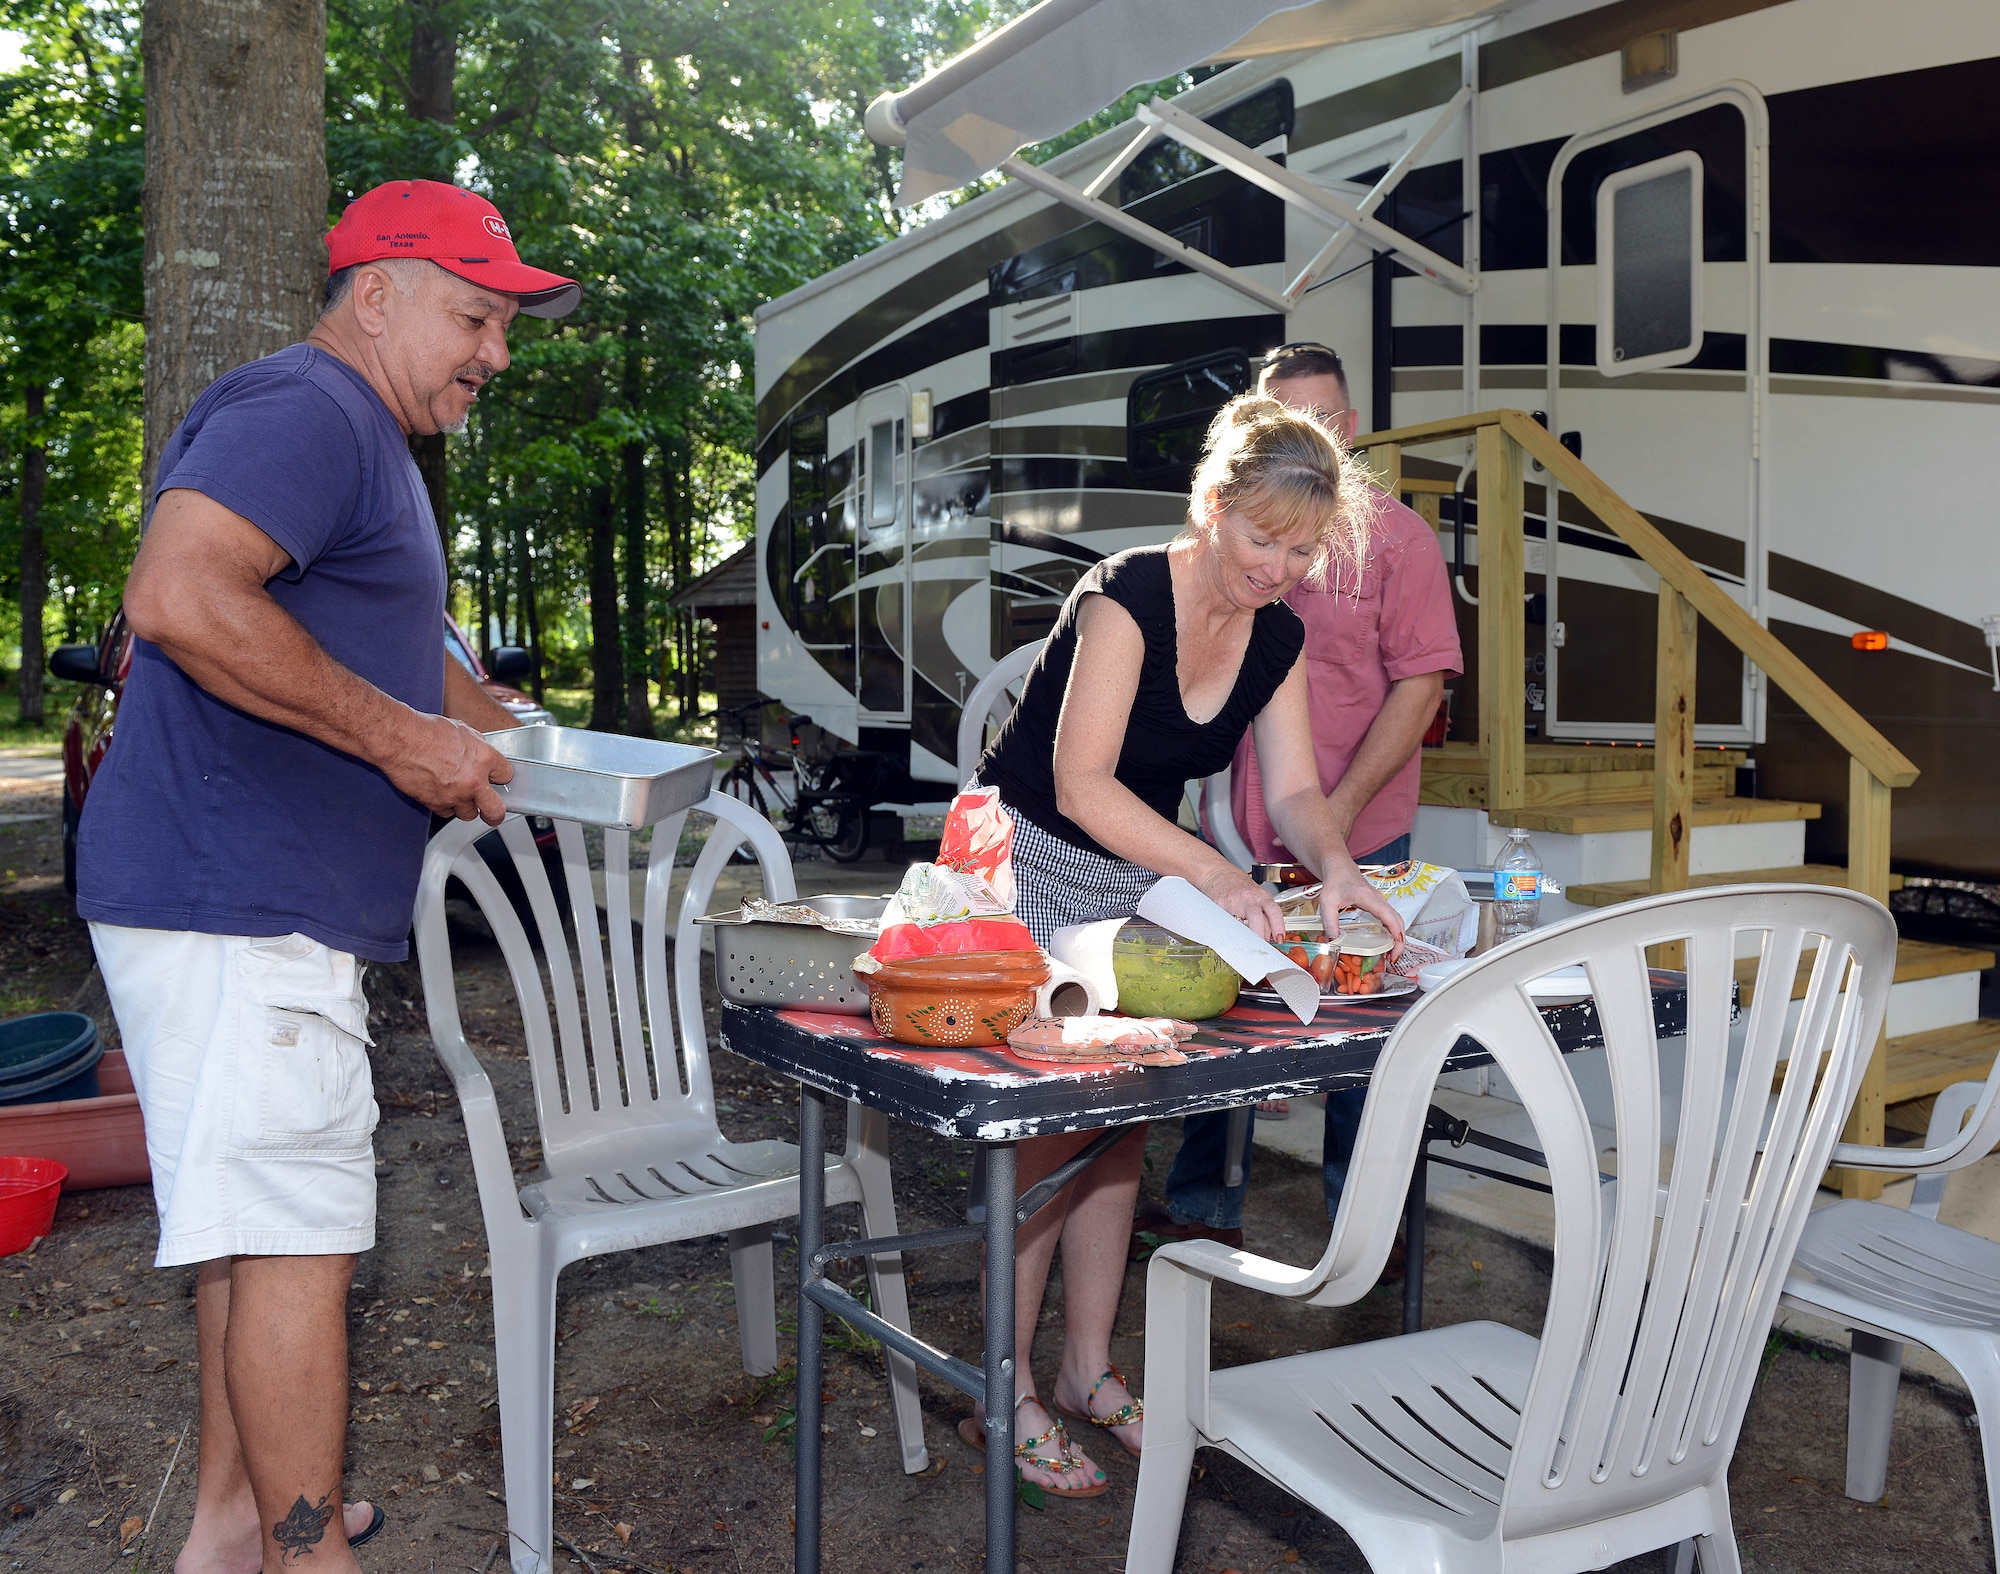 Retiree Juan Bermudez and his wife, Kelli, prepare for an evening cookout at Robins Family Campground, May 20, 2015. (U.S. Air Force photo by Tommie Horton)